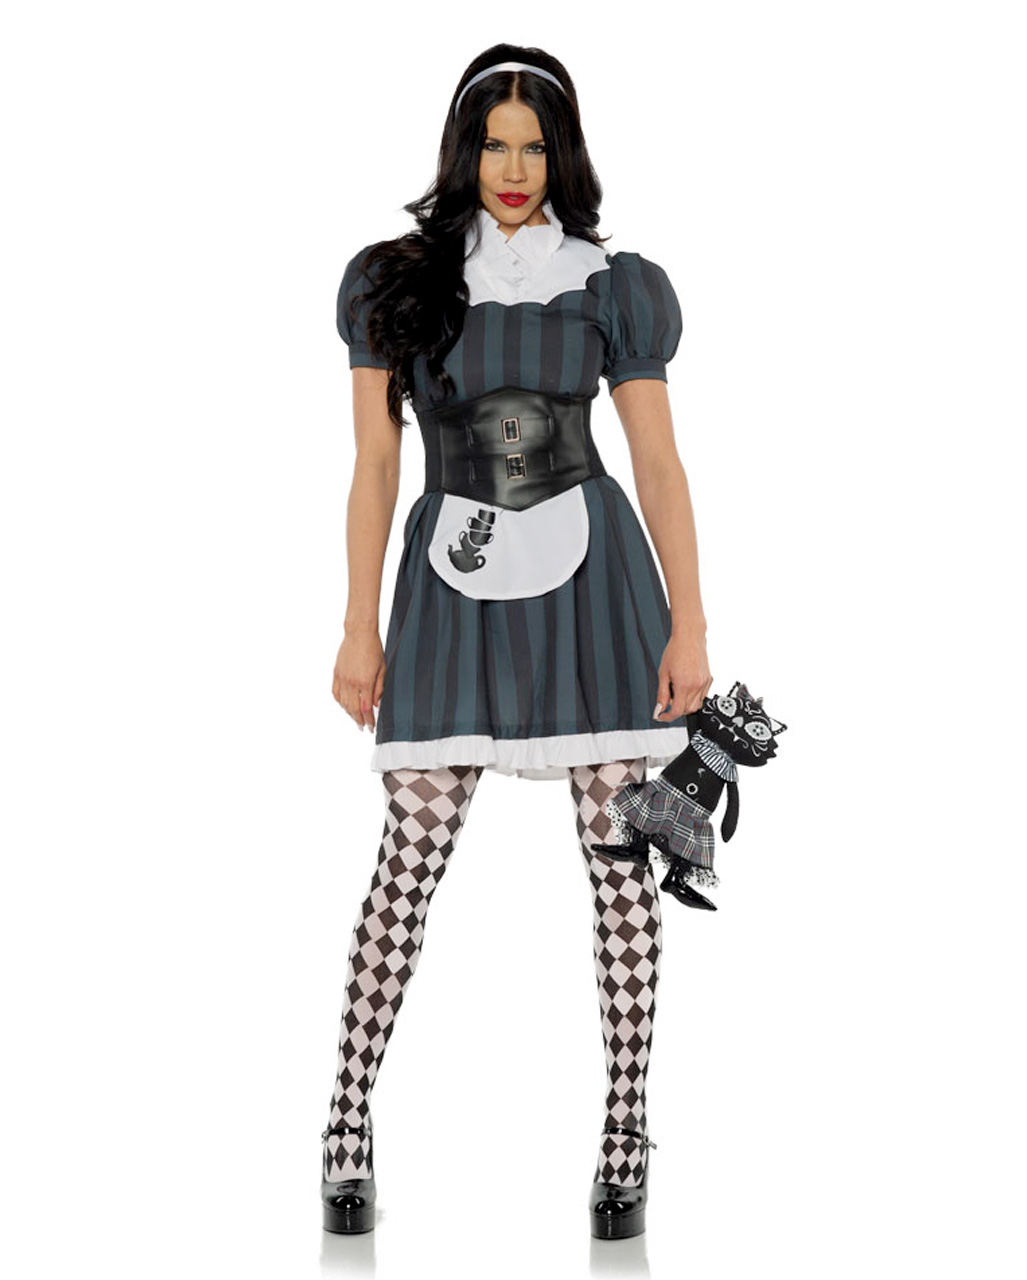 Black Roses Ladies Fancy Dress Gothic Halloween Adults Costume Corpse Bride 